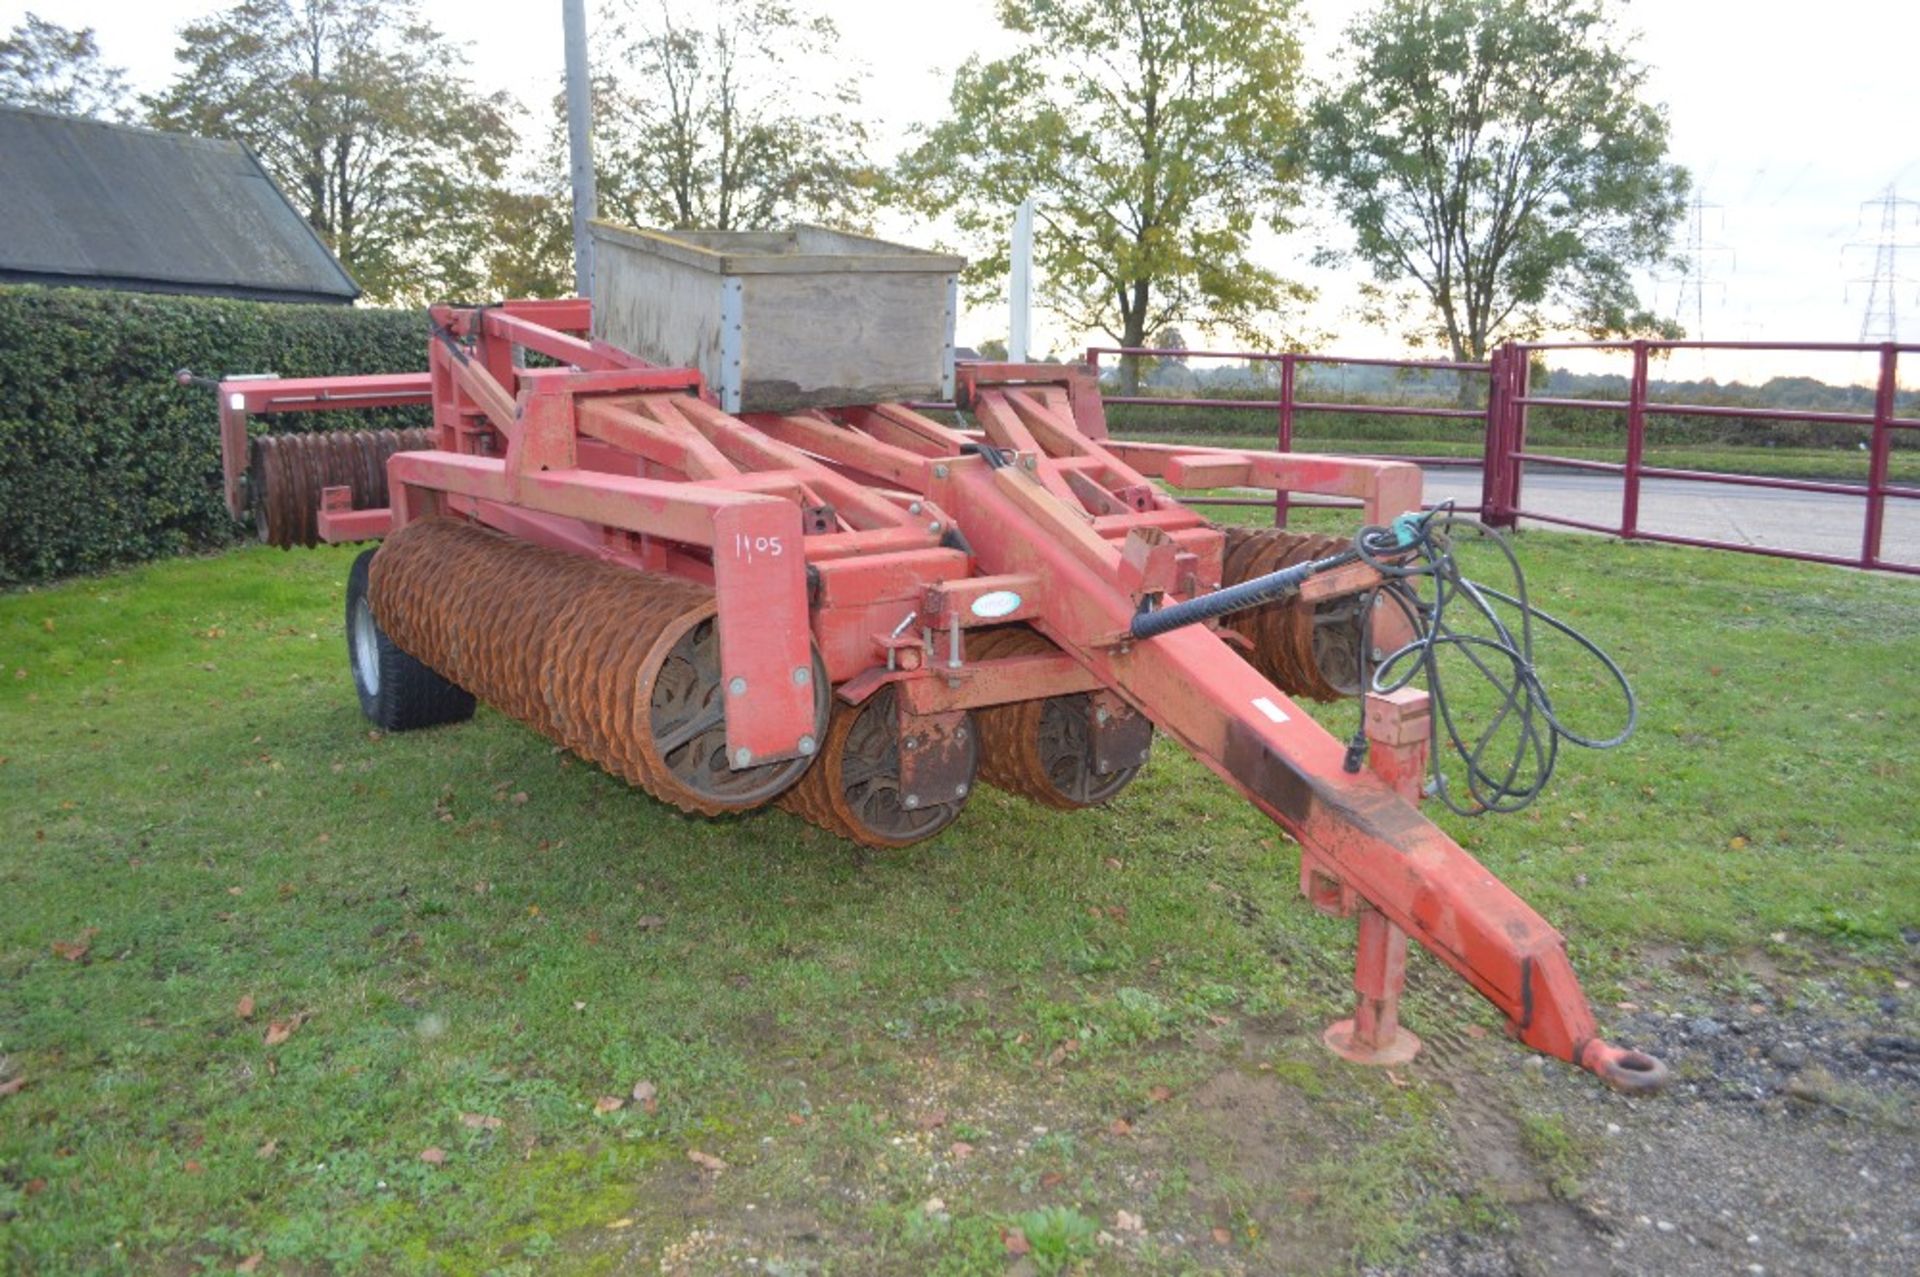 Opic He-Va 1220 12.2m hydraulic folding rolls. 2007. Serial number 338659. With breaker rings. Owned